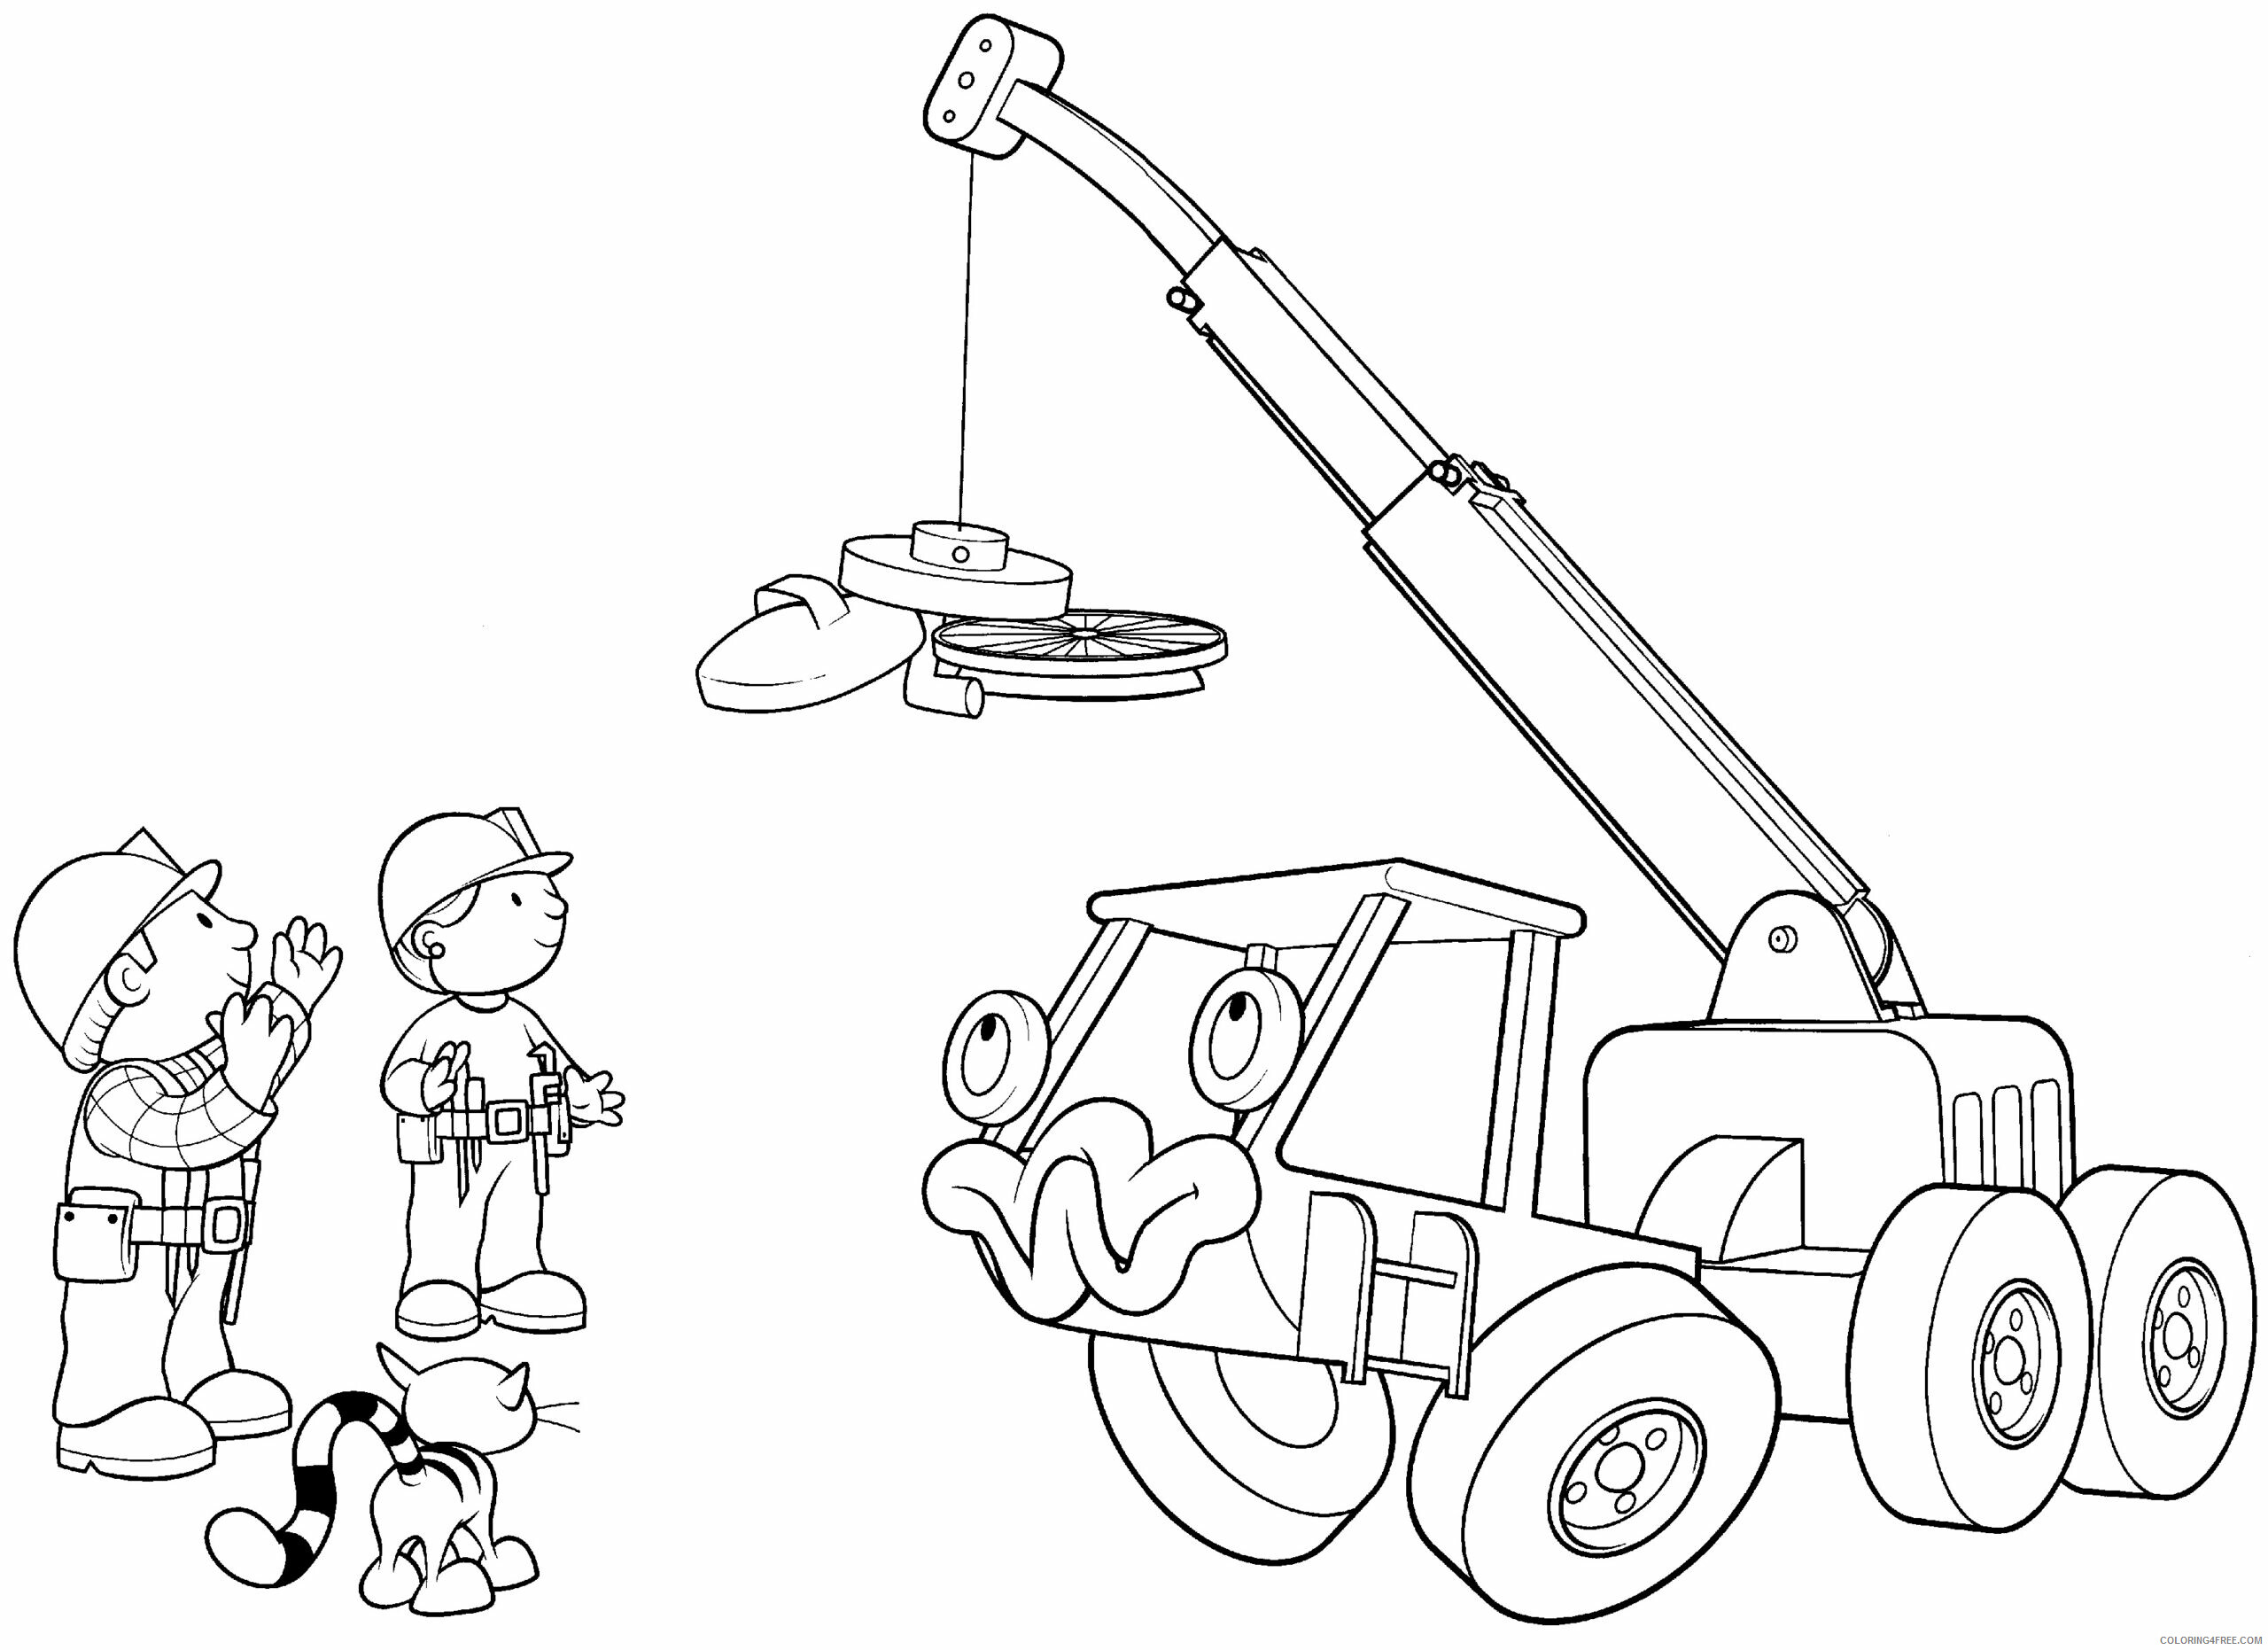 Bob the Builder Coloring Pages TV Film bob the builder 18 2 Printable 2020 01030 Coloring4free